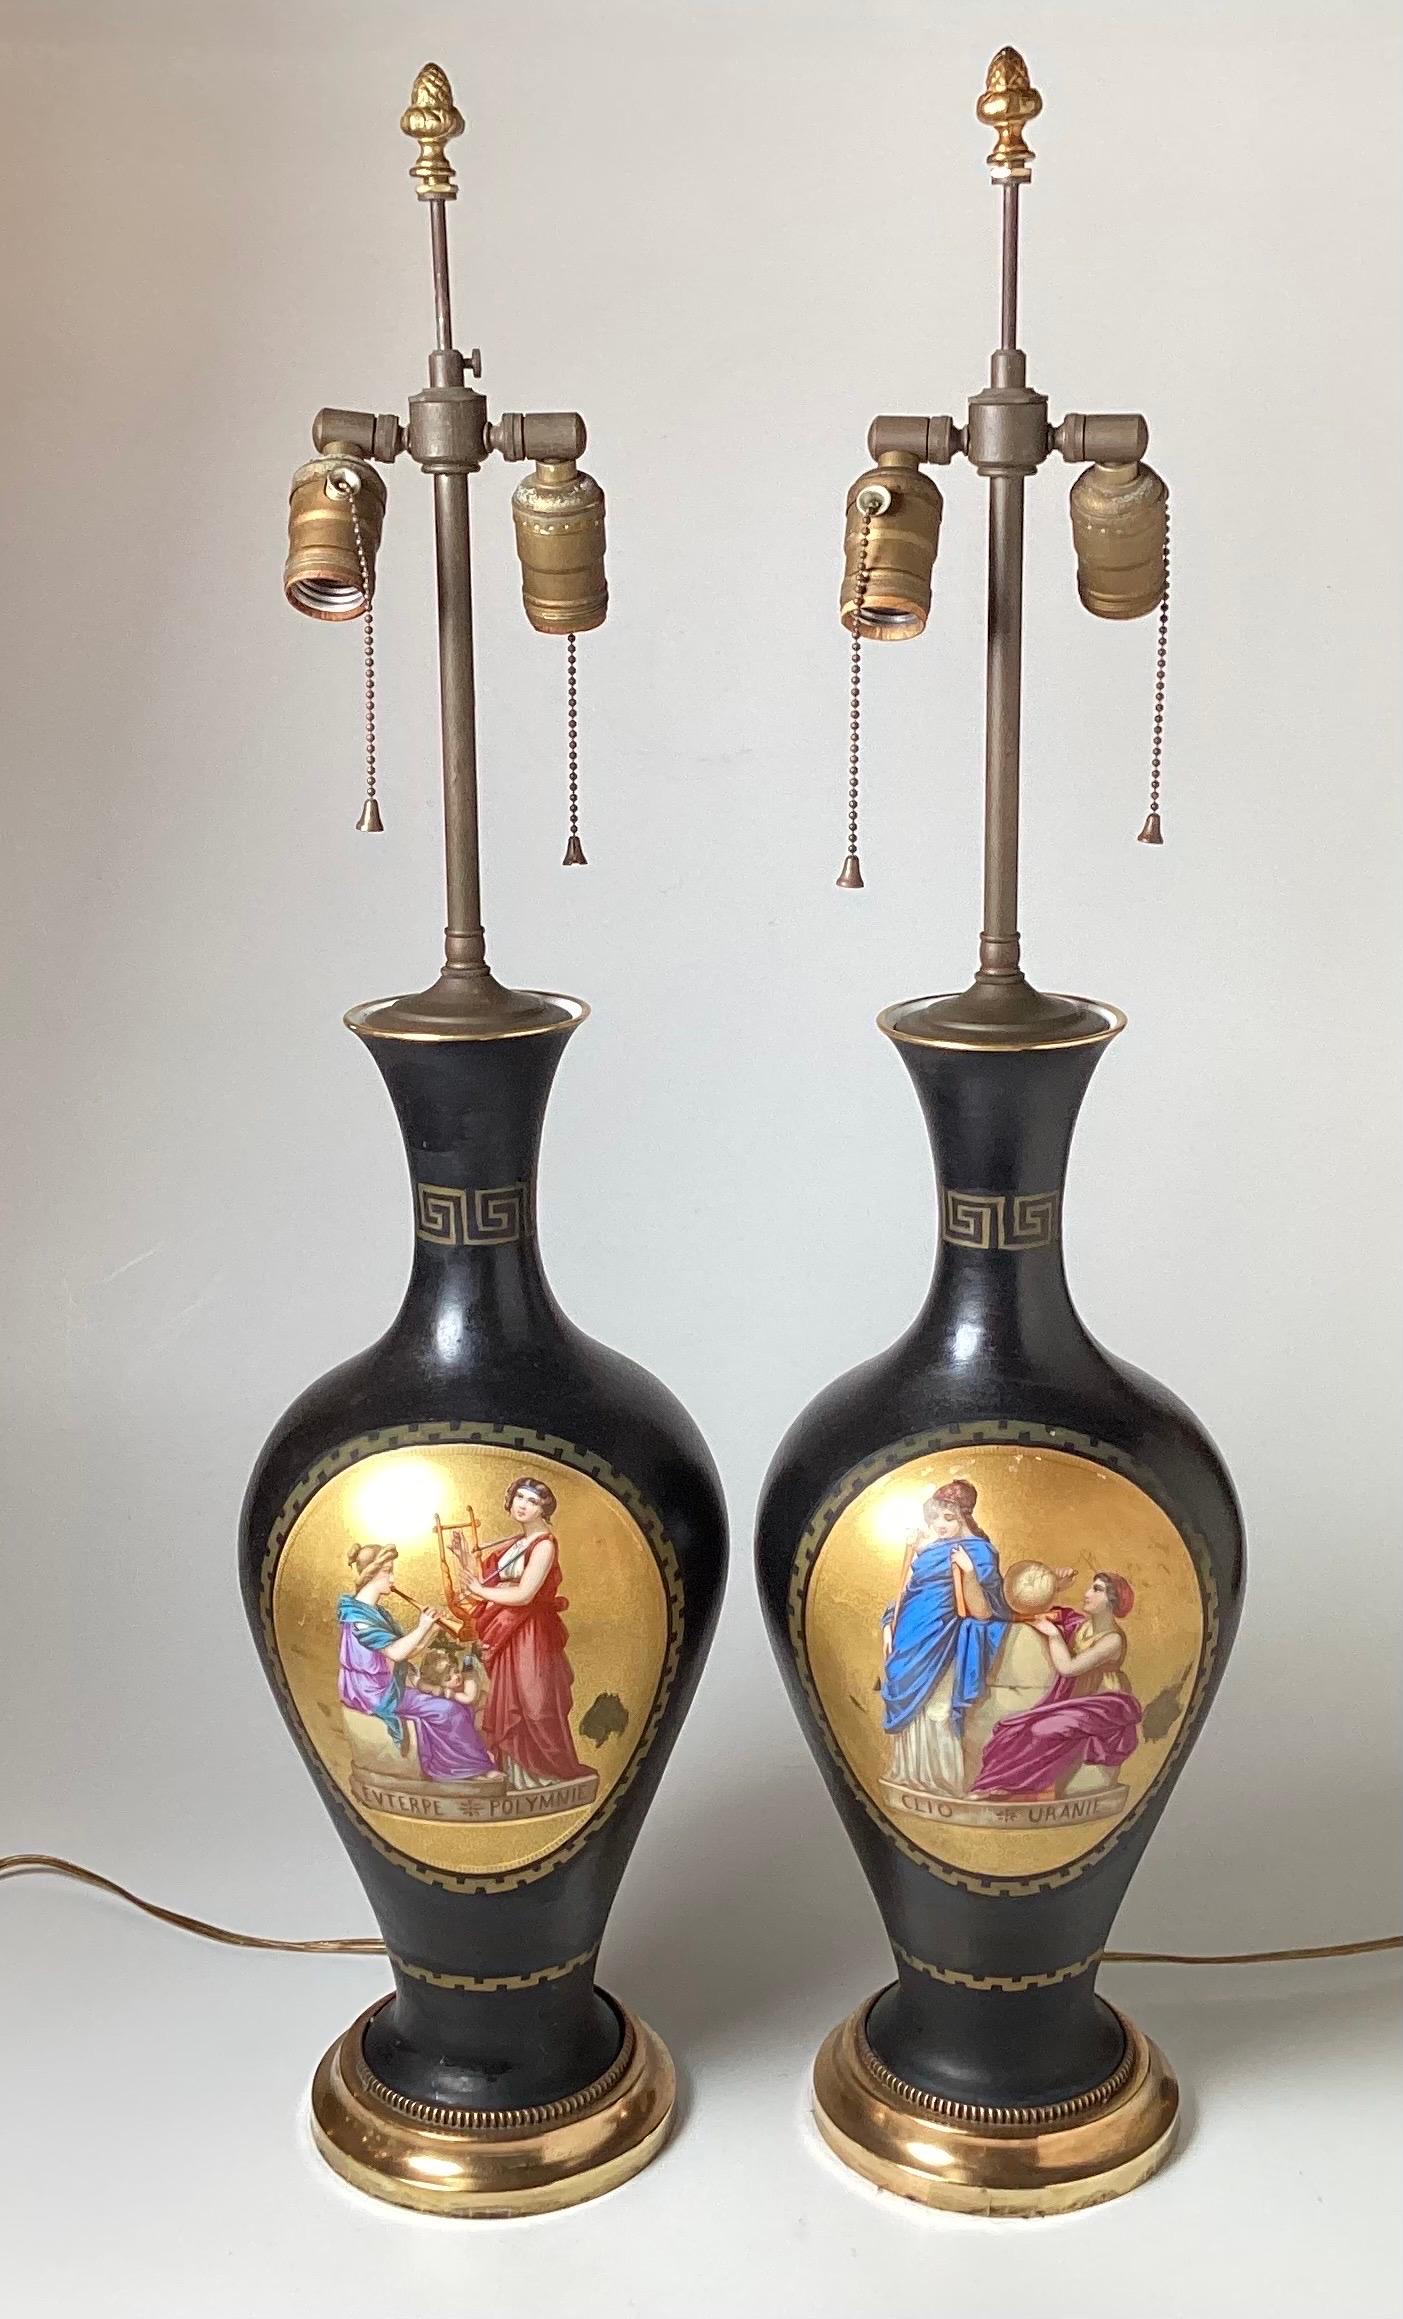 A Pair of Hand Painted neoclassical French Porcelain lamps. The porcelain urns with gilt cartouches depicting Greek Muse's Evterpe, Polymnie, Clio and Uranie... Each lamp has two sockets for extra light, with a polished brass base. The lamps are